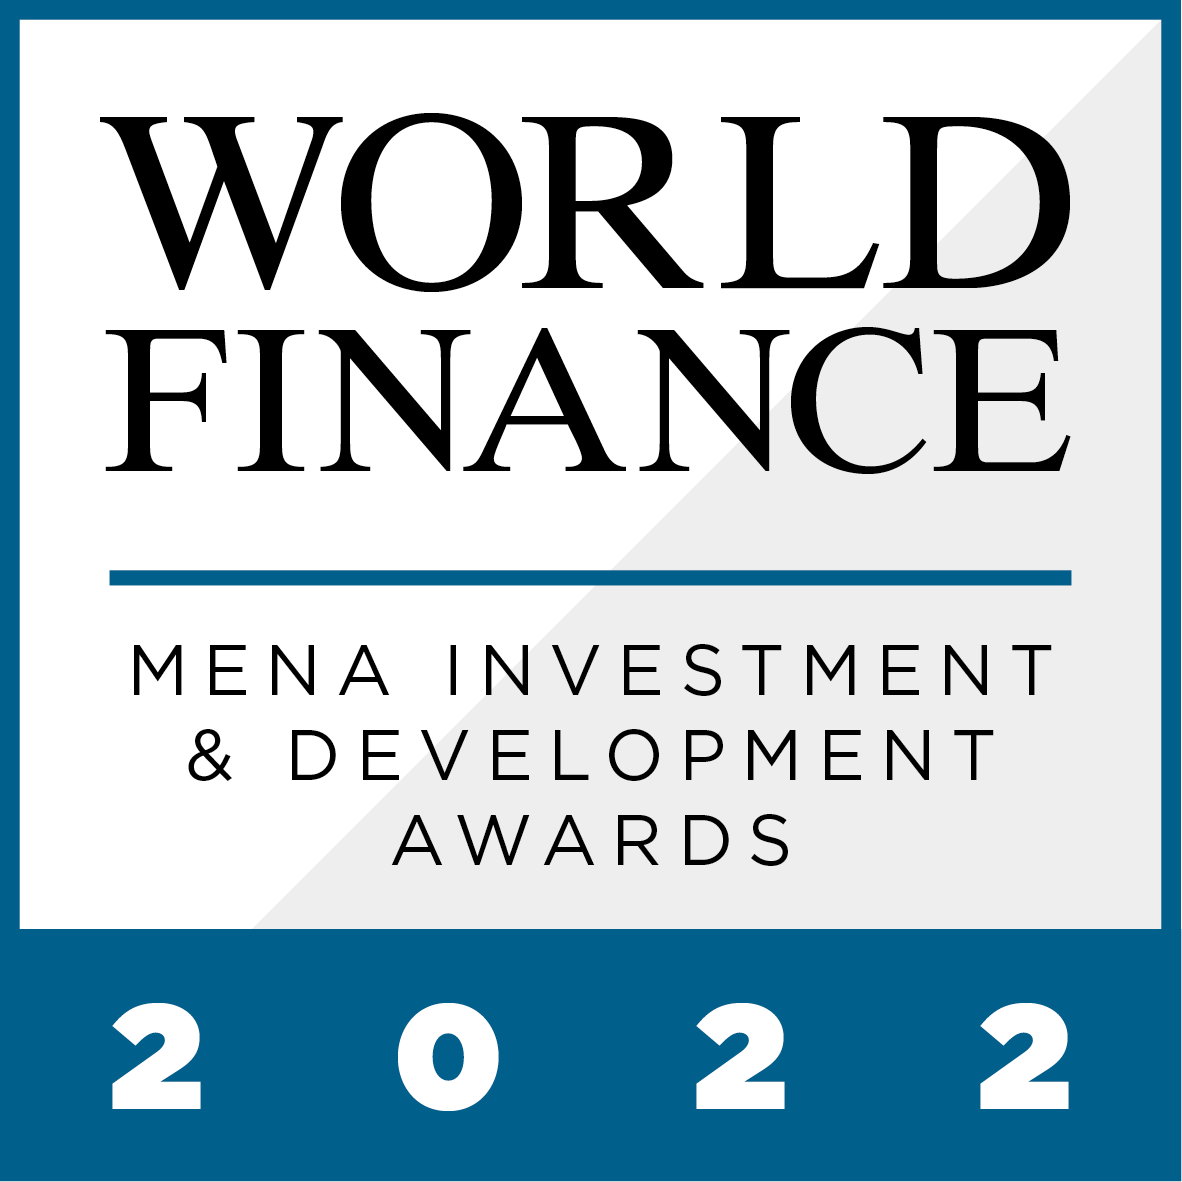 Please see below the full list of the MENA Investment and Development Awards 2022, as awarded by World Finance magazine